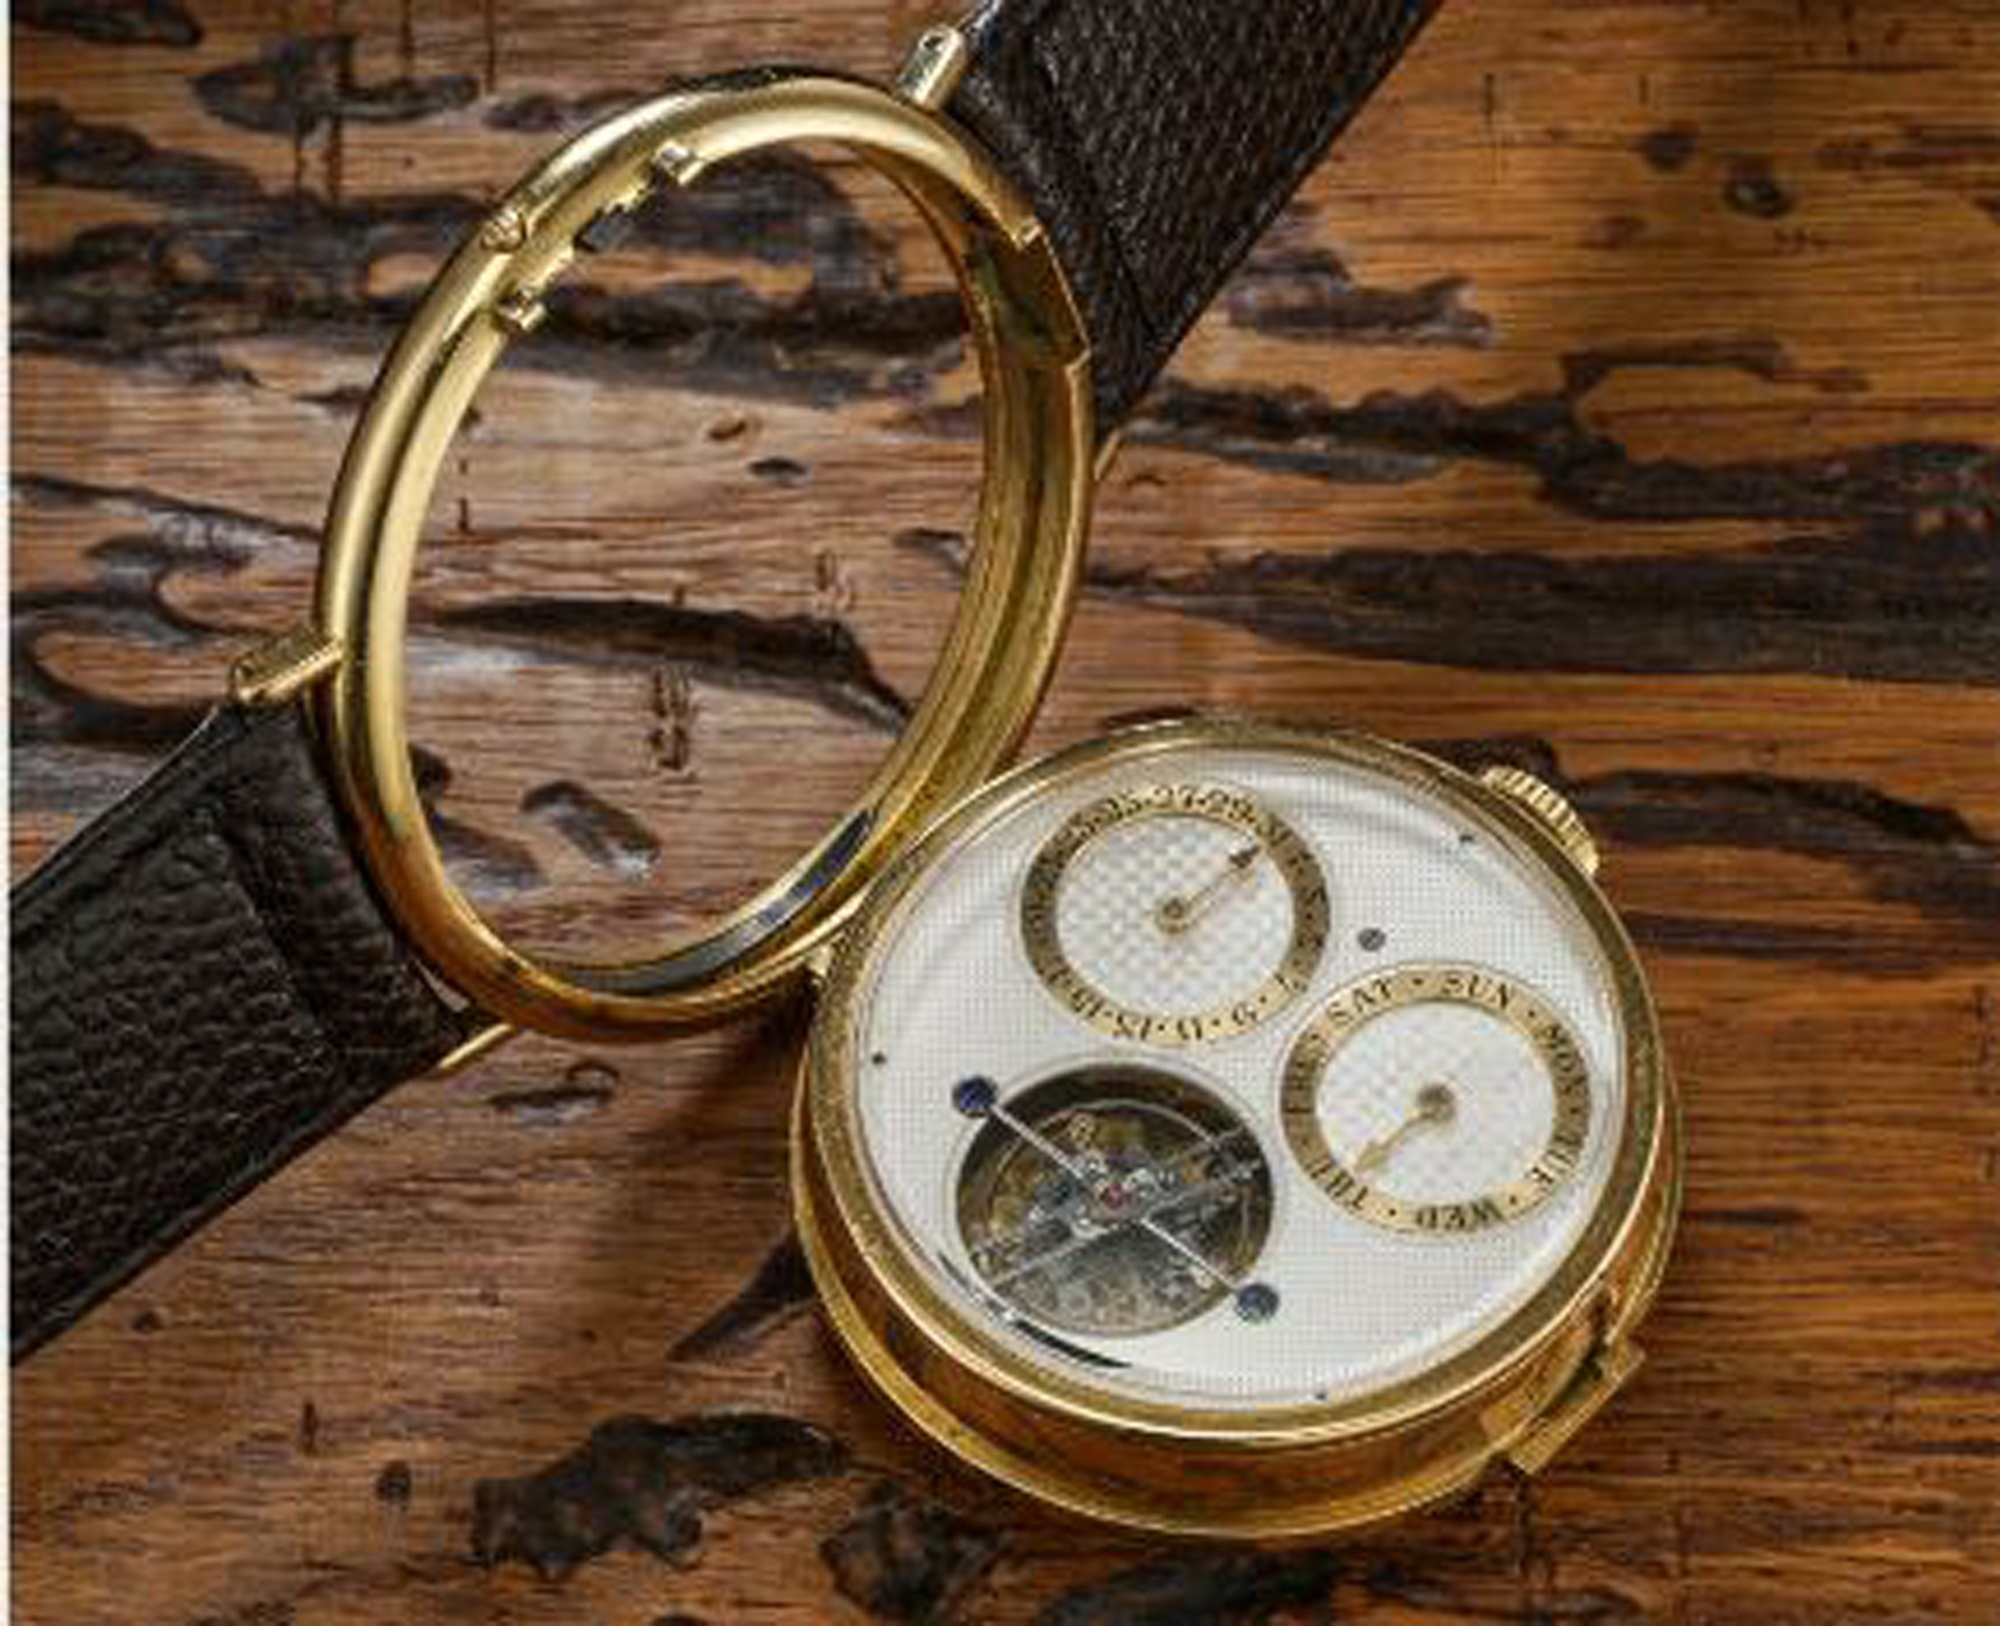 George Daniels Wristwatch Fetches Record $4 Million in Geneva - Bloomberg